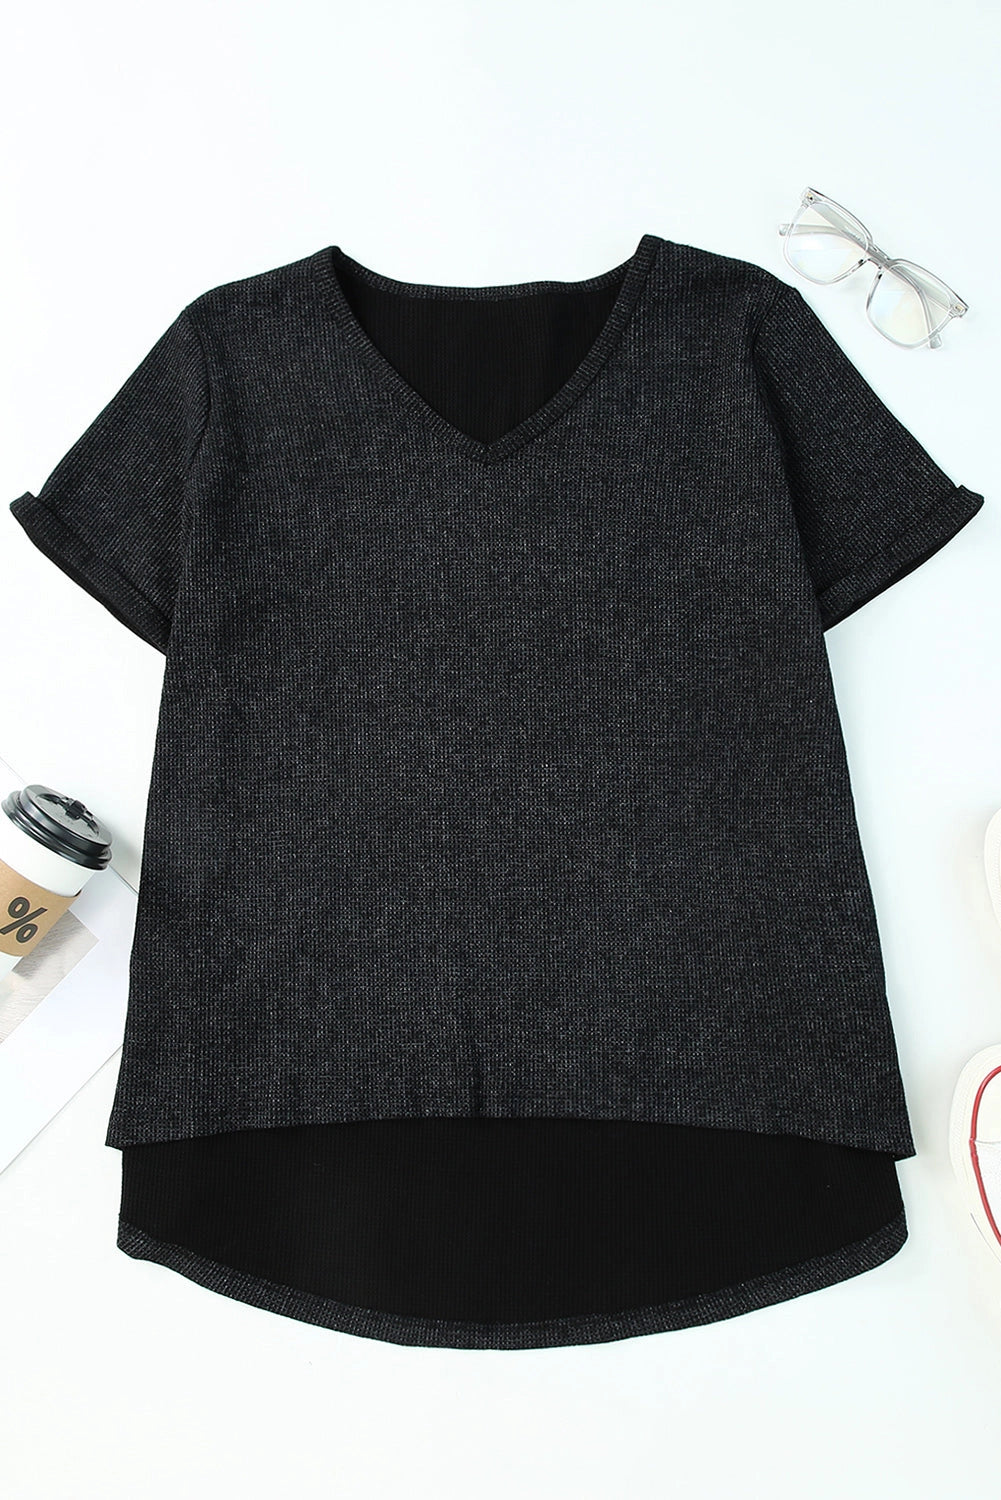 Casey Loose Fit Top